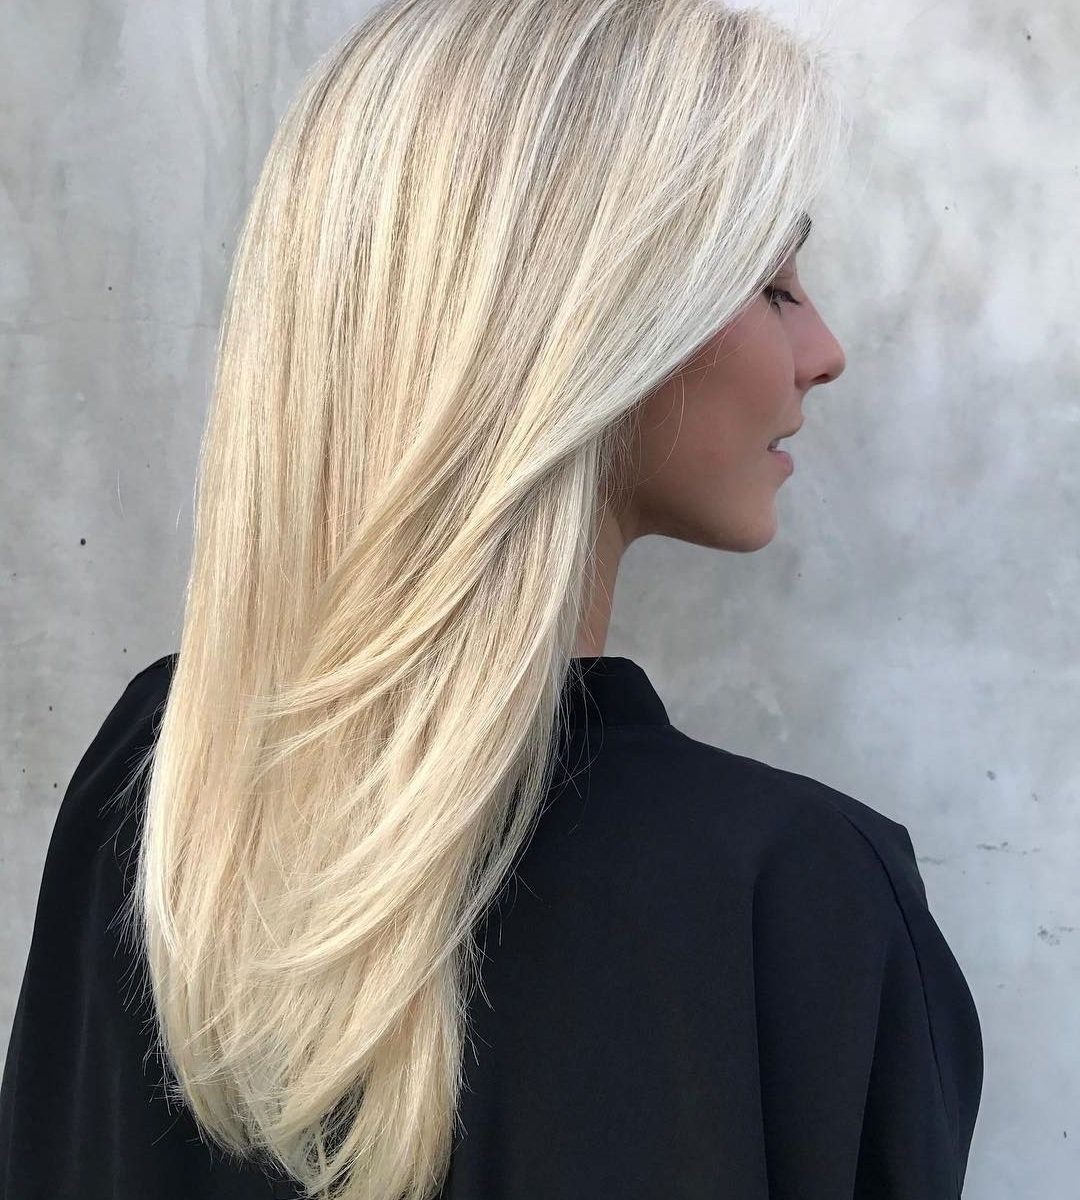 Julianne Hough's Wedding Hair: How To Achieve It Regarding Most Up To Date Julianne Hough Wedding Hairstyles (View 4 of 15)